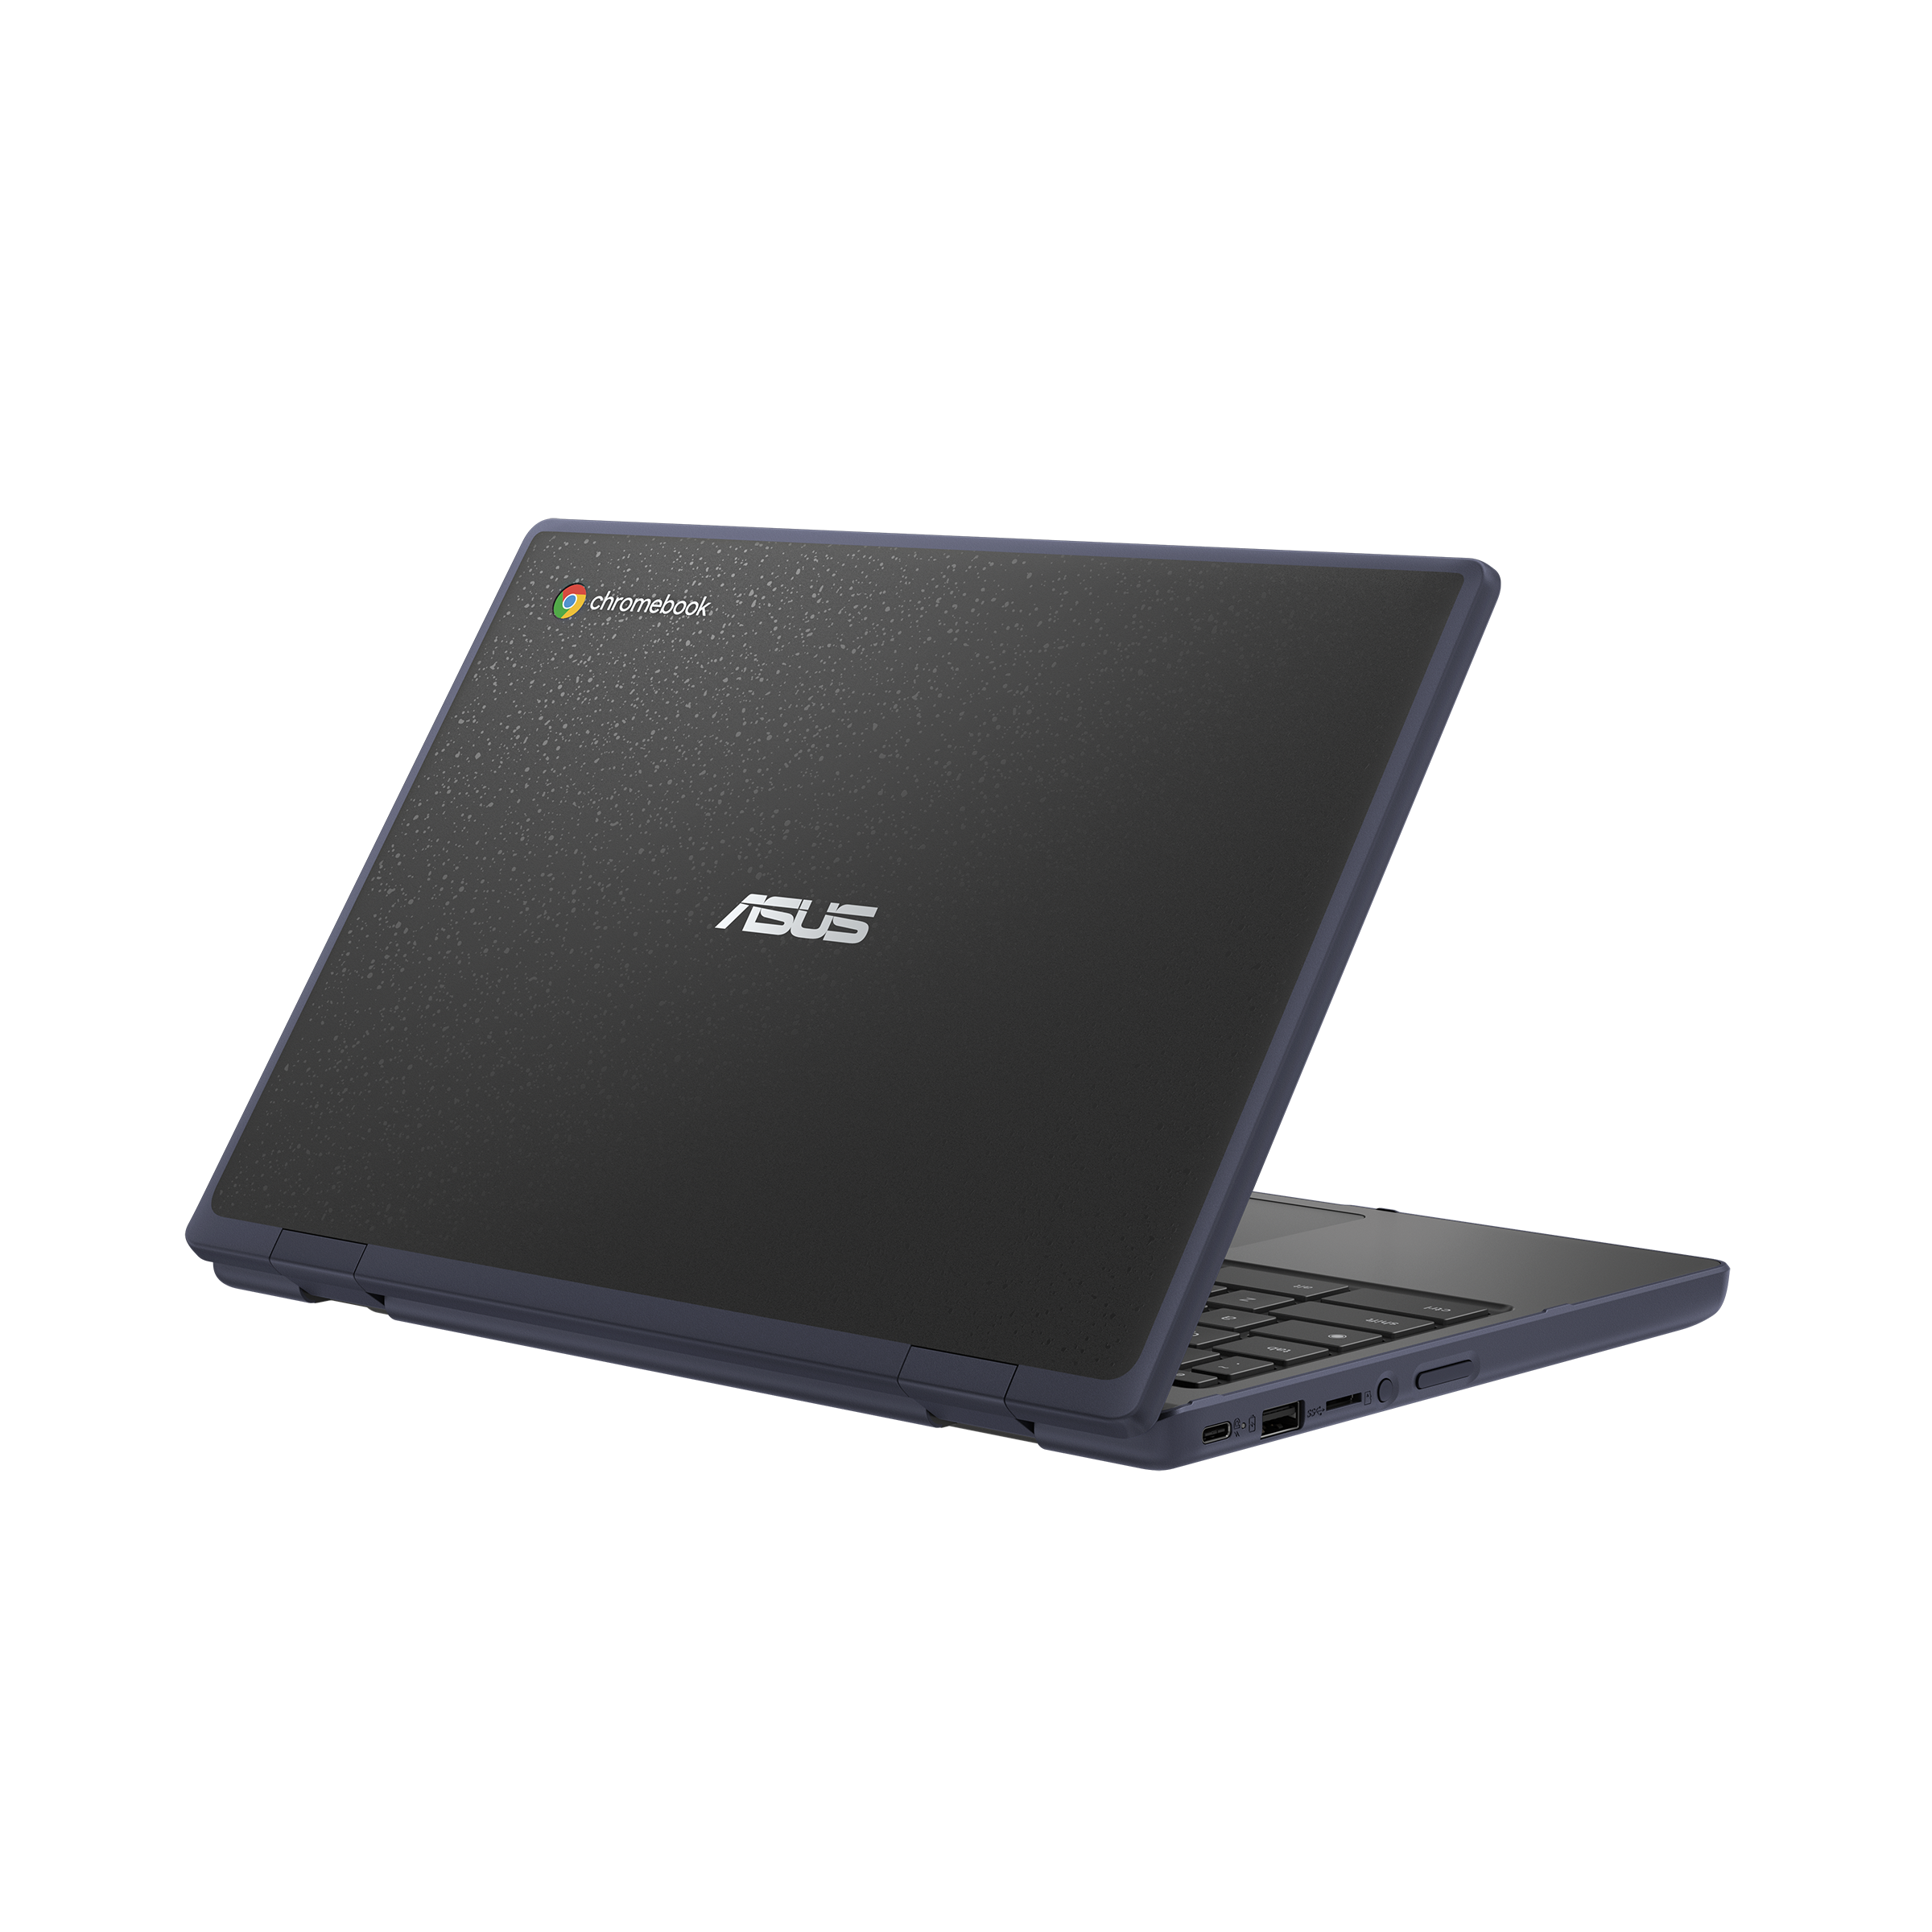 ASUS Chromebook CR11 (CR1102C)｜Laptops For Students｜ASUS Global